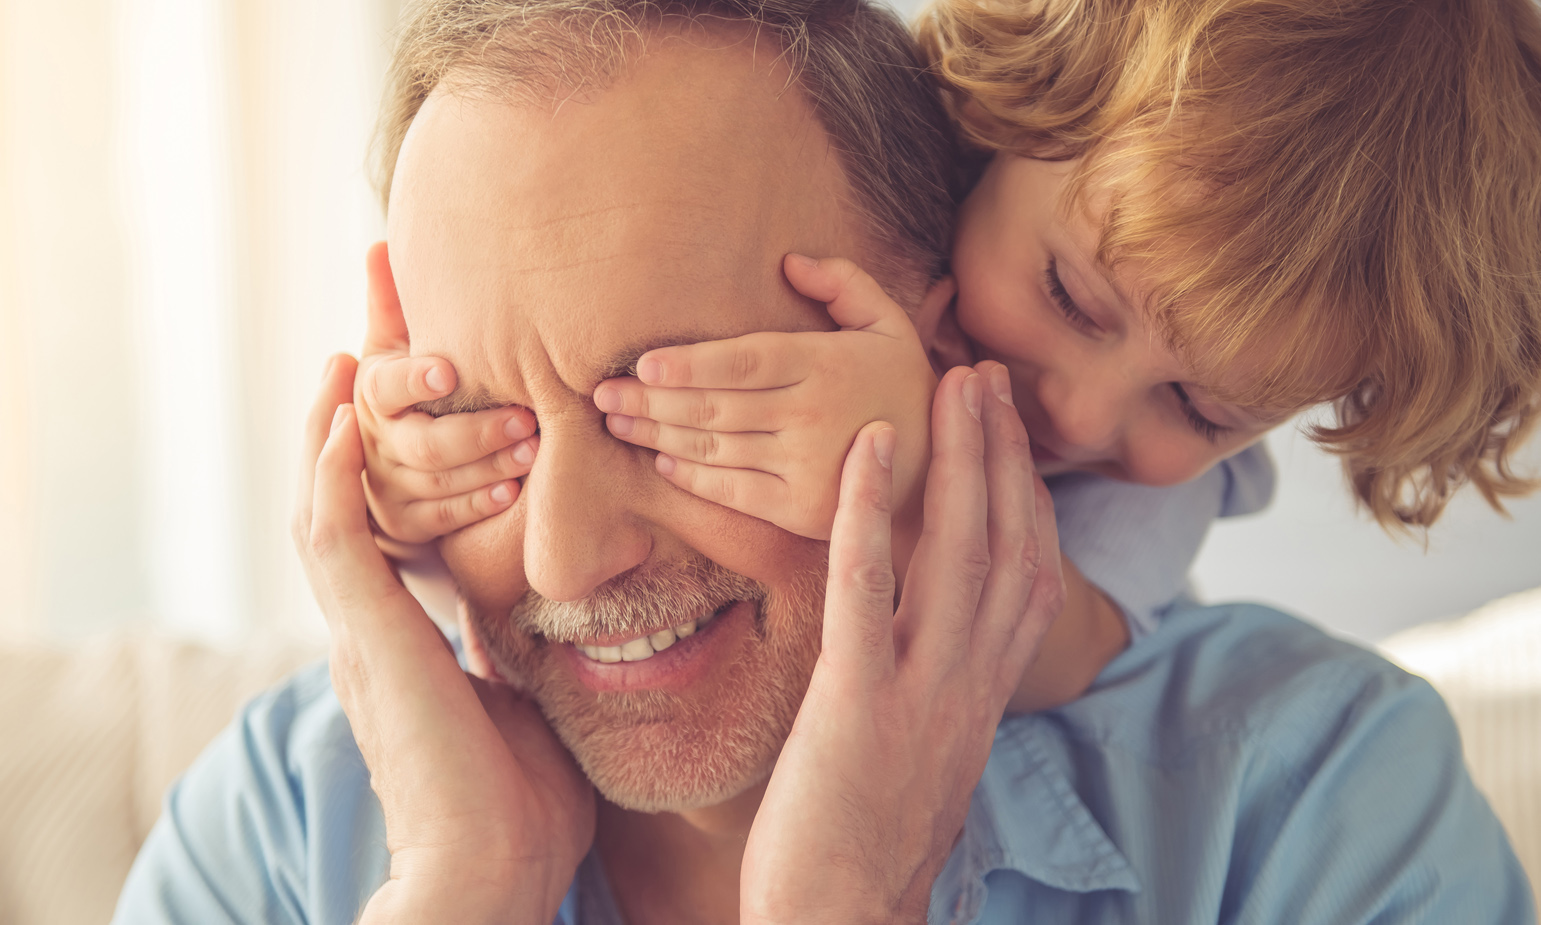 Young child perched on backrest of sofa behind grandpa's head reaches his hands around to cover his grandpa's eyes